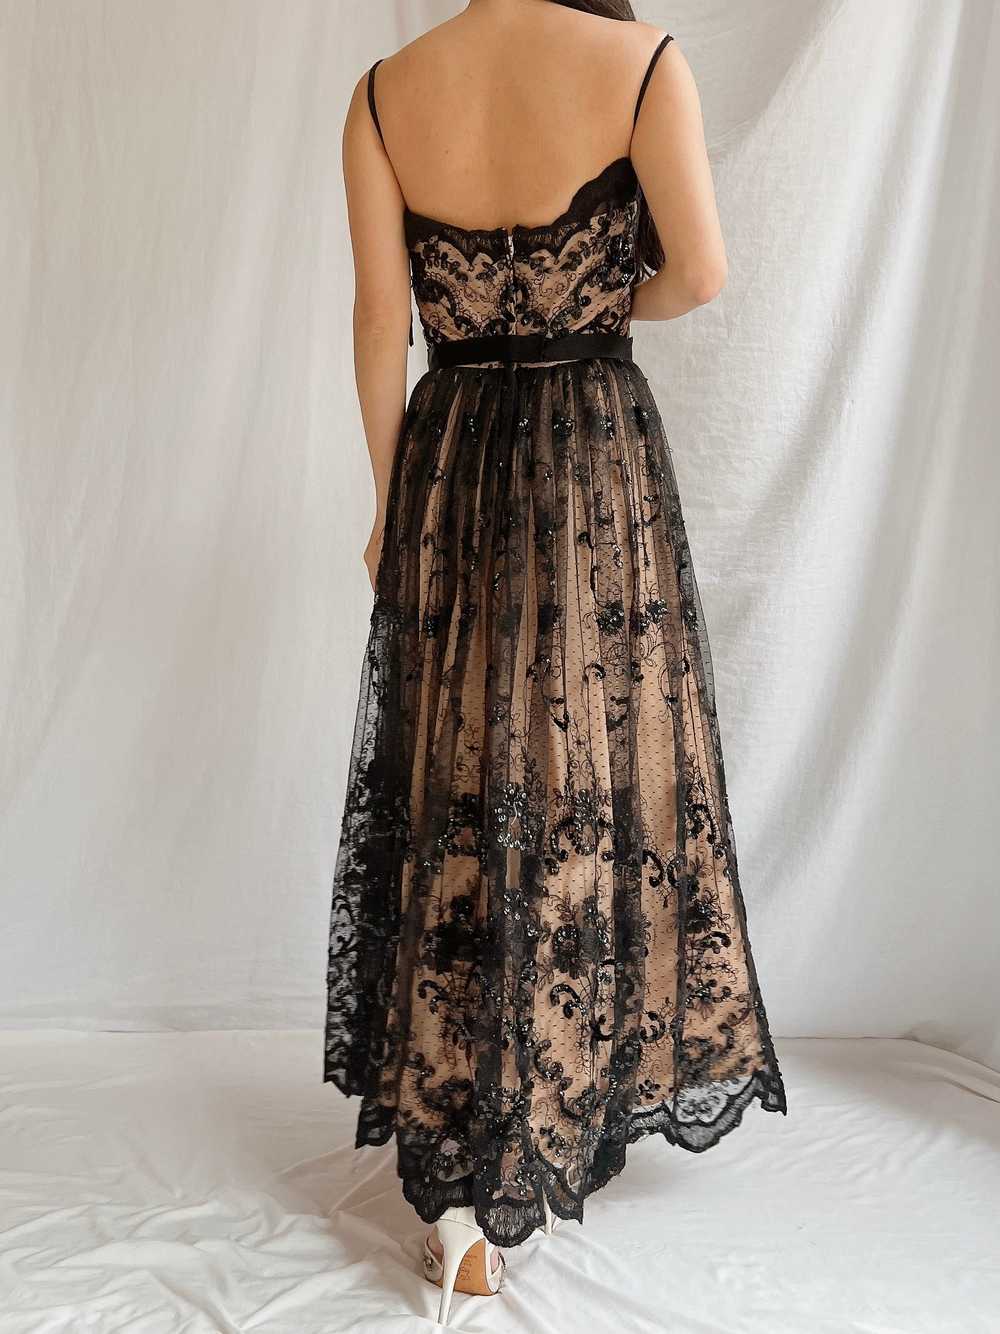 Vintage Nude and Black Lace Dress - S - image 5